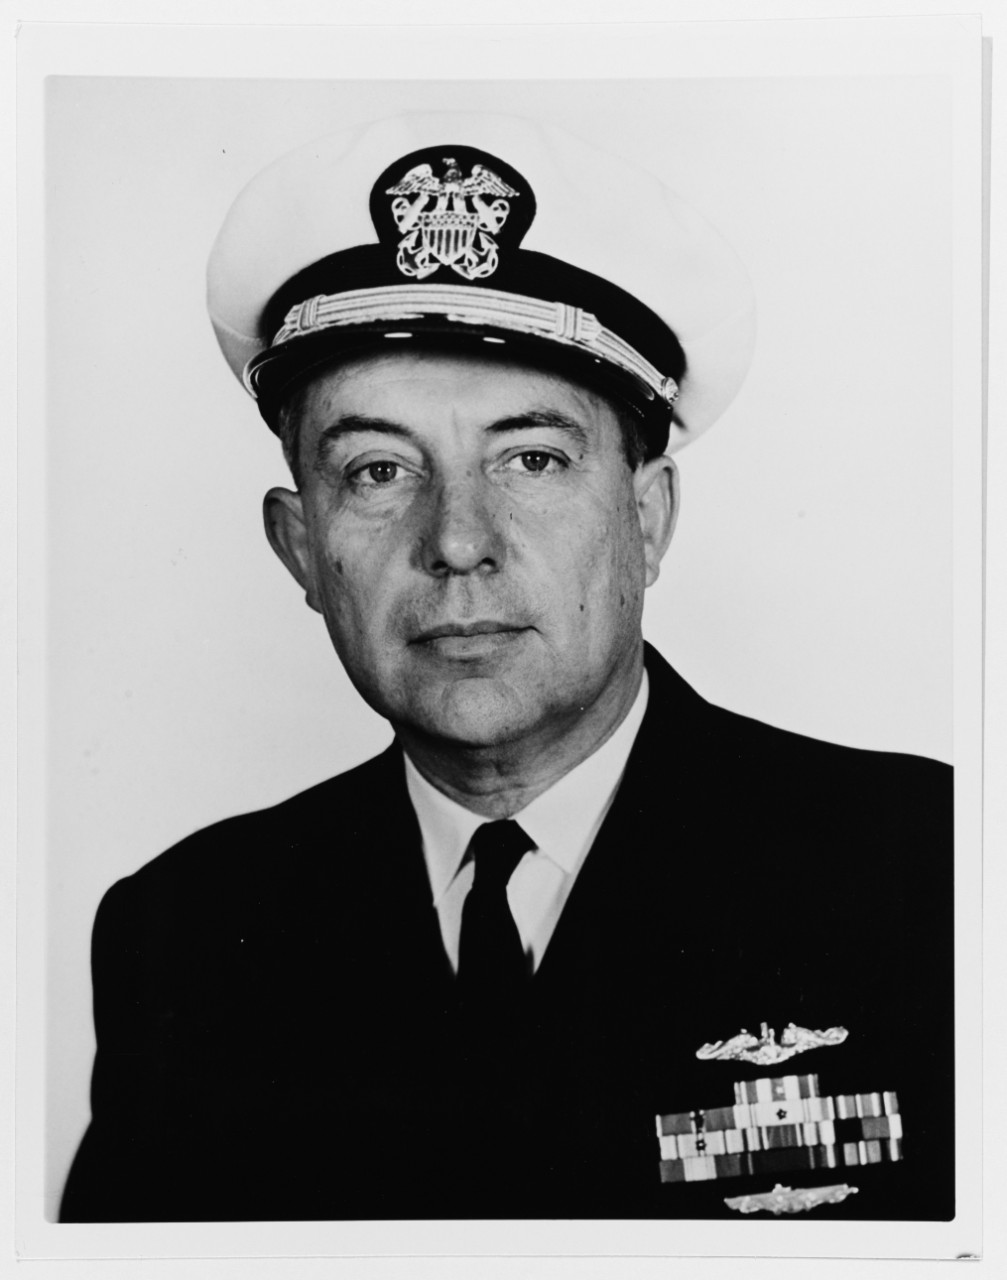 Rear Admiral Phillip A. Beshany, USN